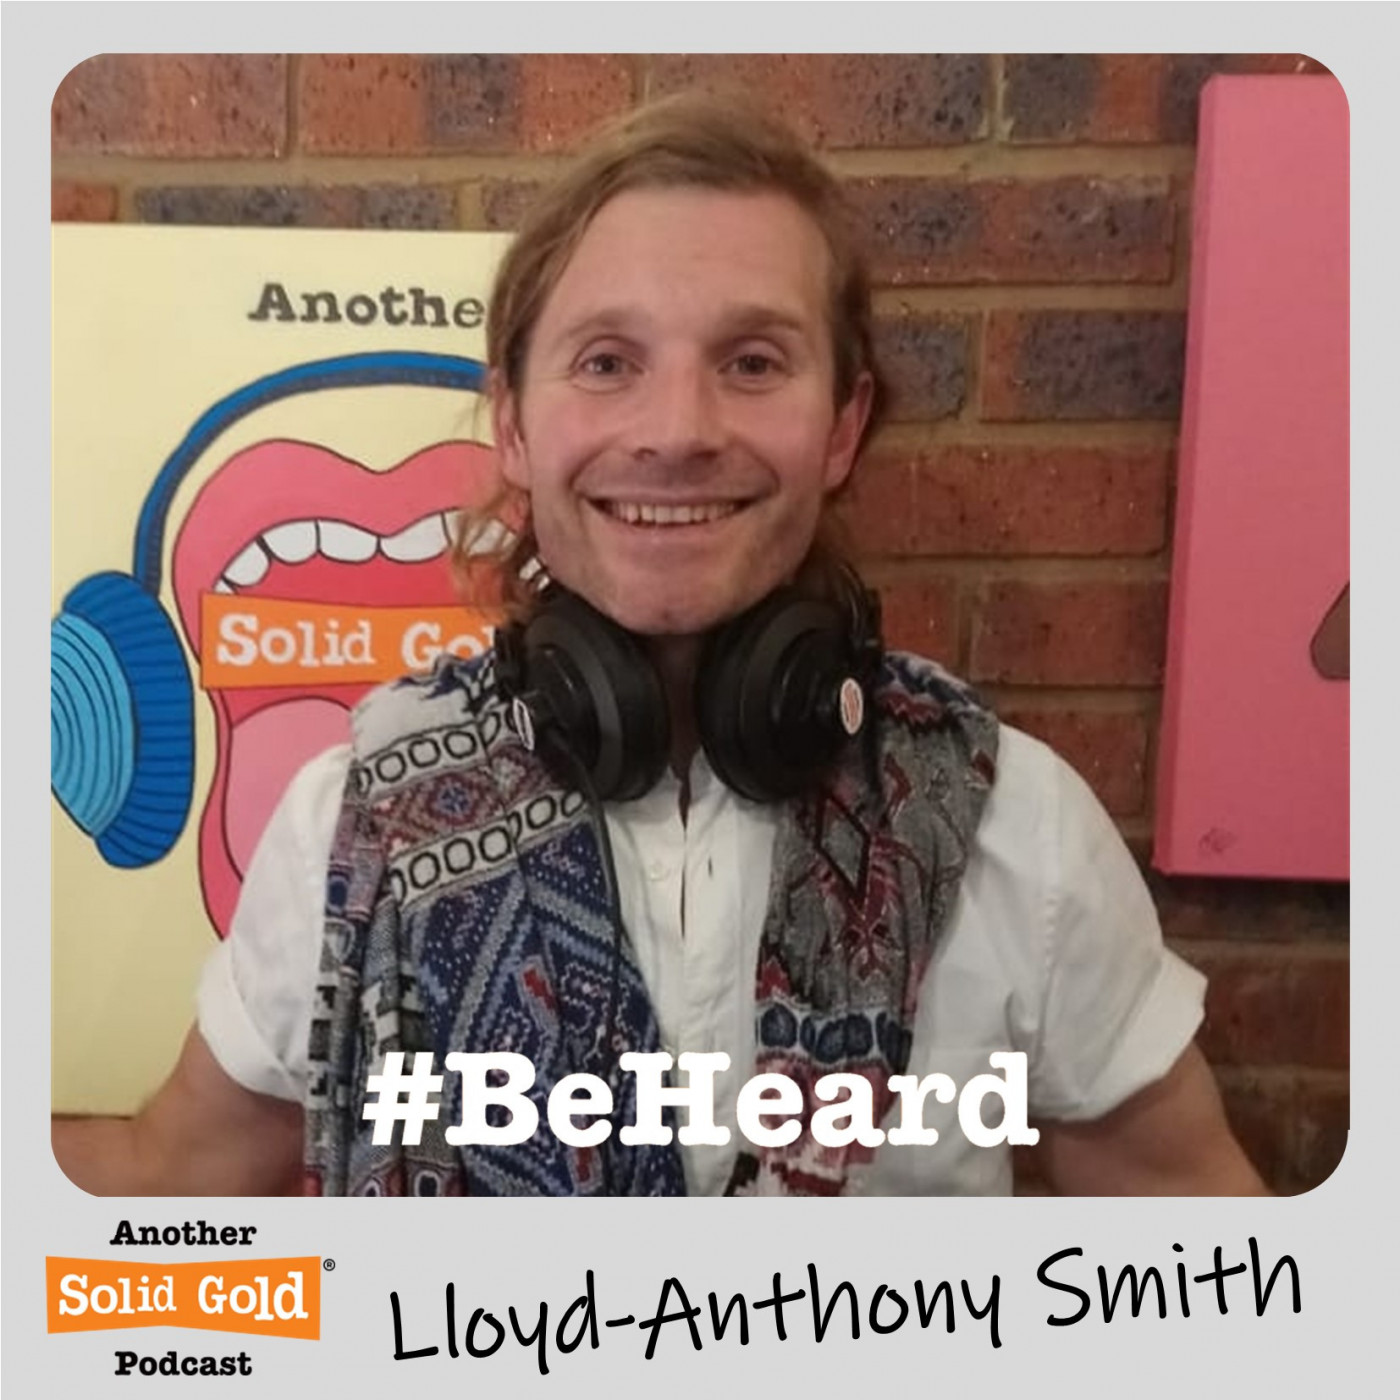 #002 All together now! | Lloyd-Anthony Smith